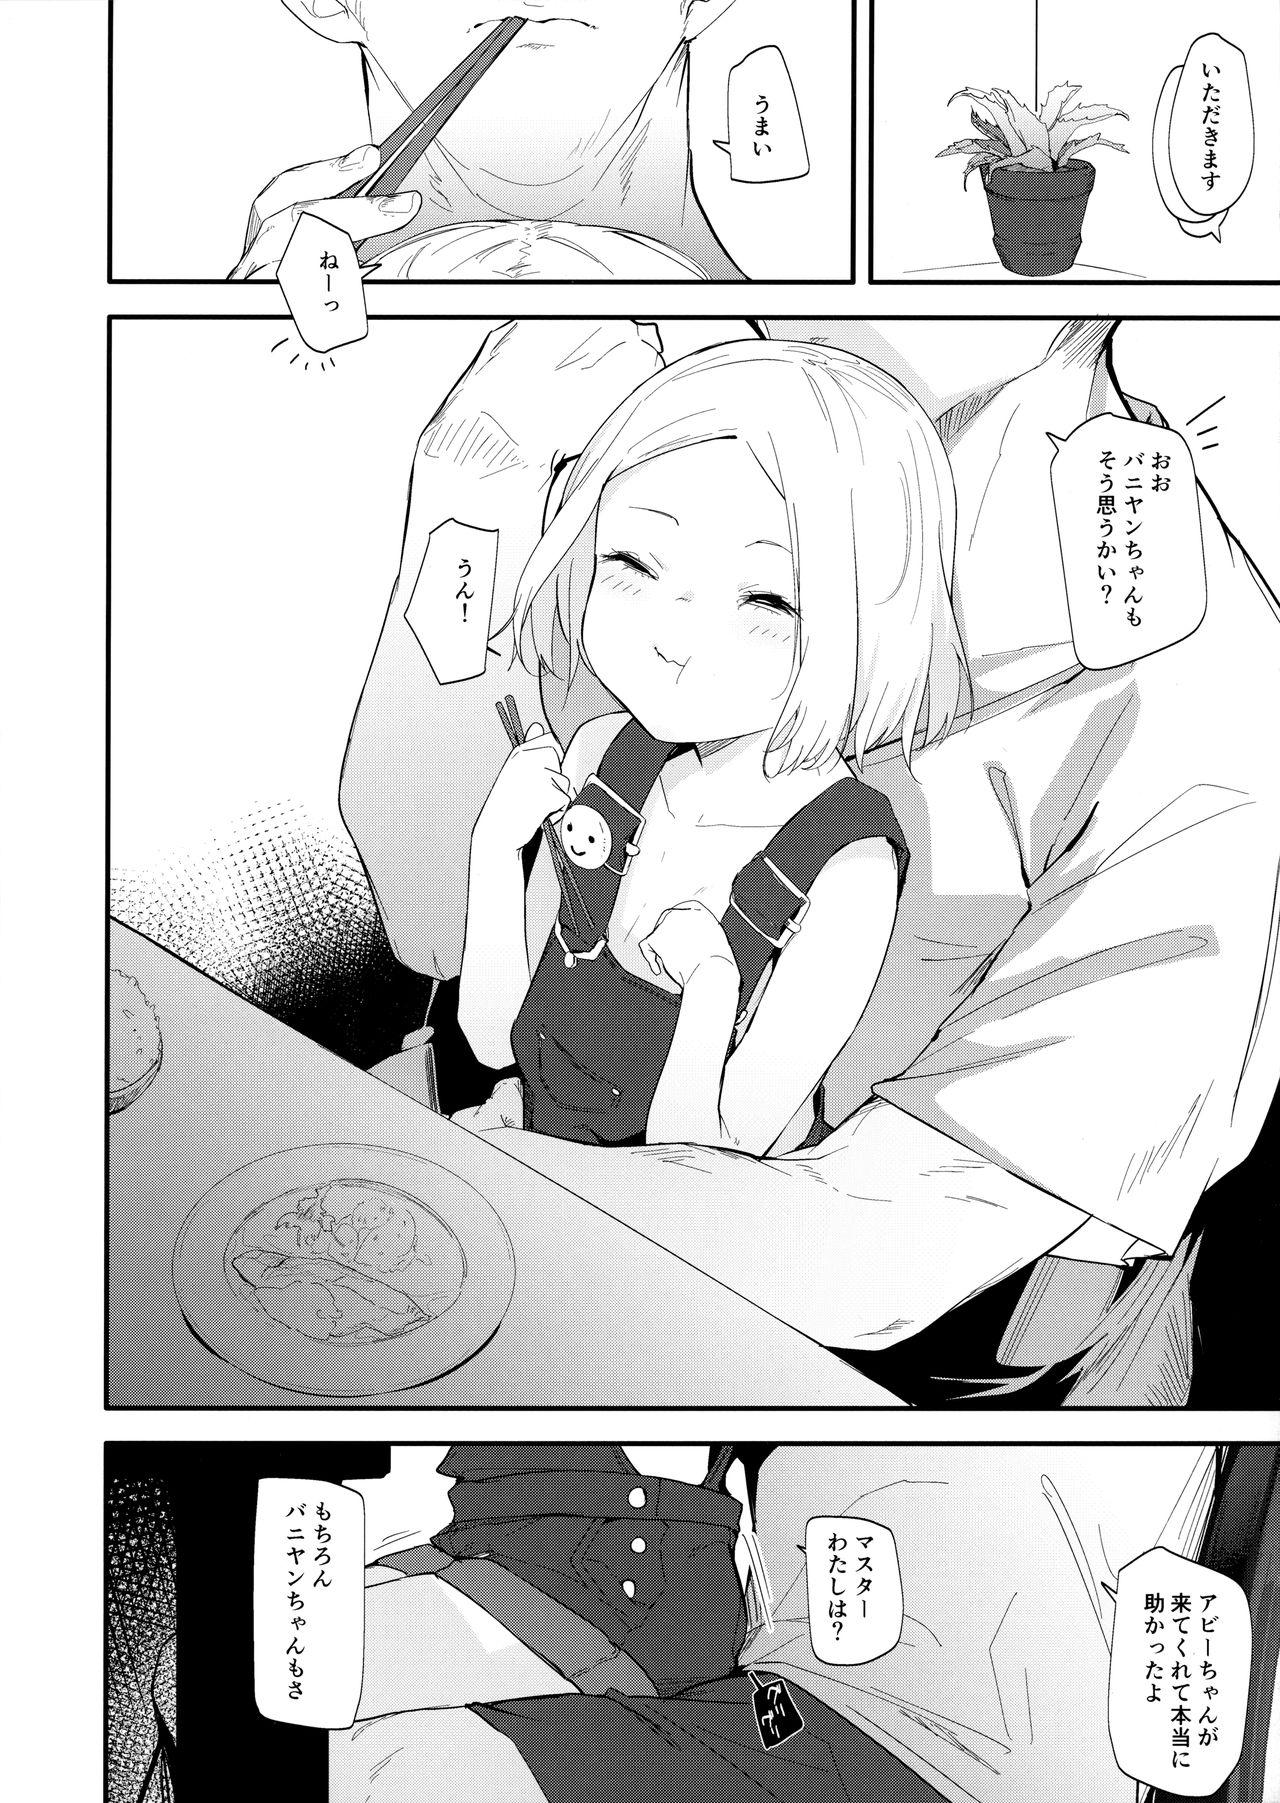 Analsex Abby Bunyan Seikatsu - Fate grand order Clothed Sex - Page 5